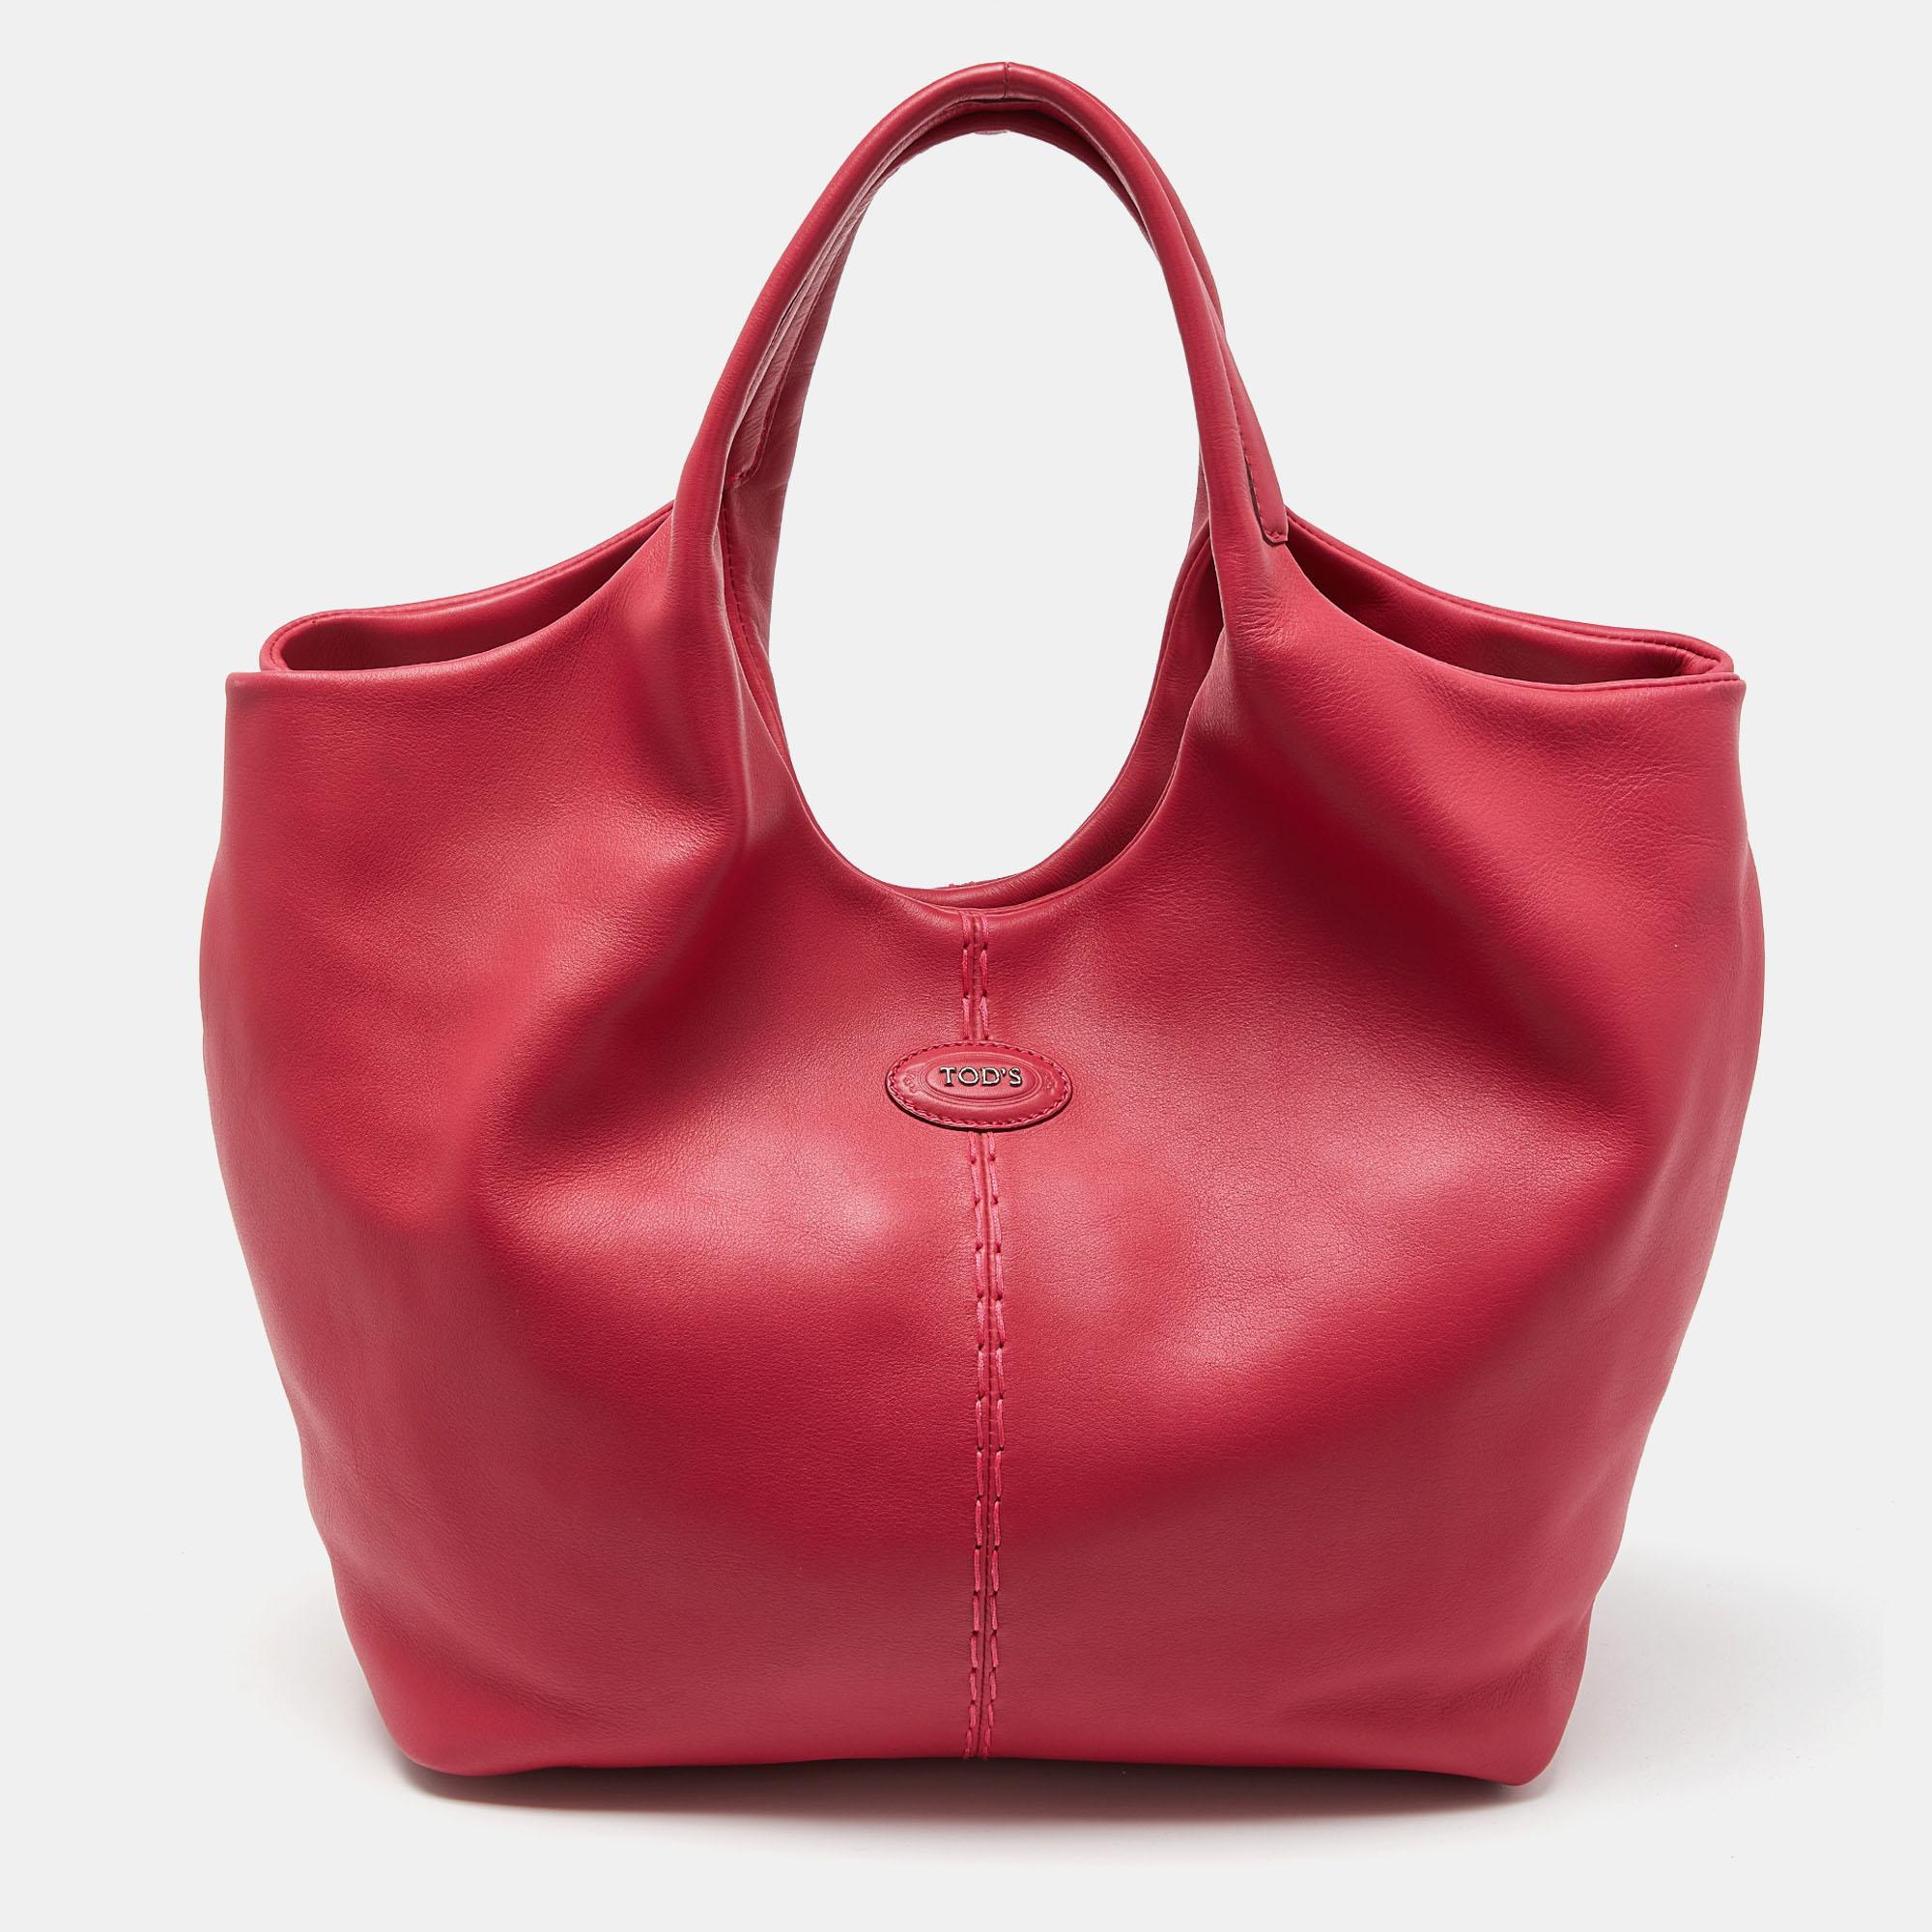 This stylish tote from Tod's is perfect for everyday use. Crafted from leather, the bag features dual handles and protective feet at the bottom. The tote comes with a nylon-lined interior to safely store your necessities.

Includes: Original